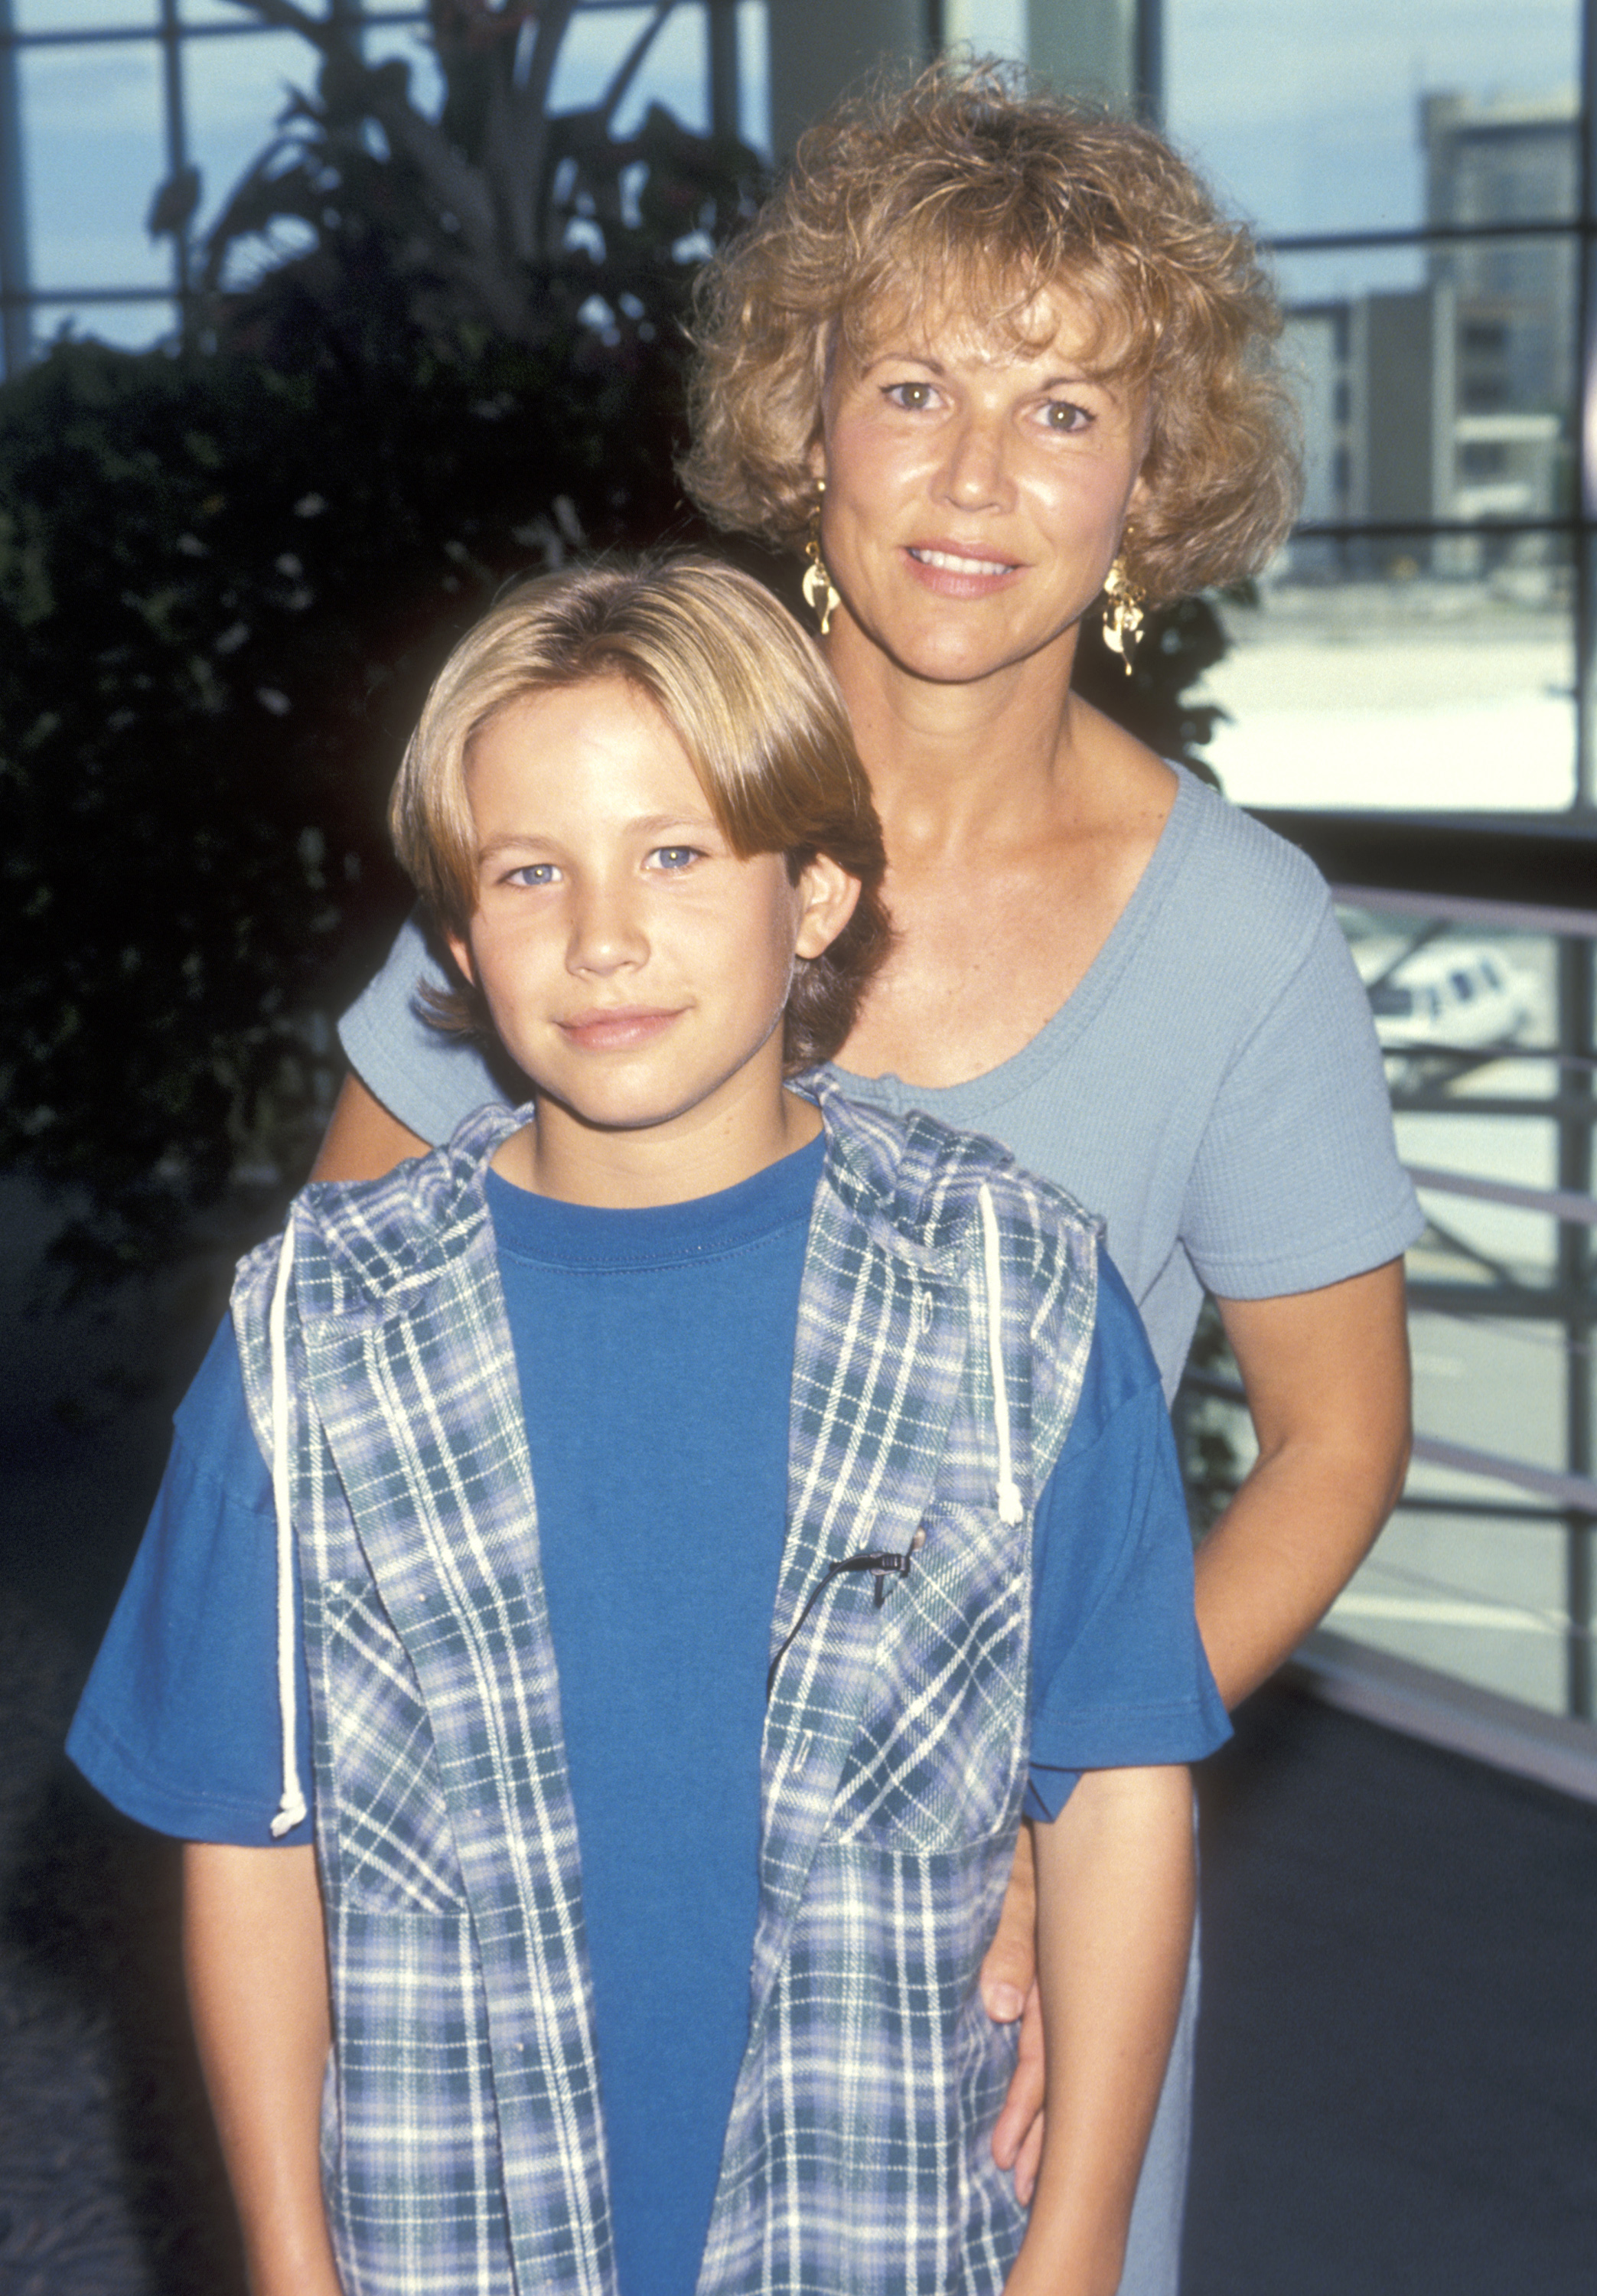 Actor Jonathan Taylor Thomas and mother Claudine Weiss attend the 1994 Blockbuster World Video Game Championship on August 21, 1994, in Fort Lauderdale, Florida. | Source: Getty Images